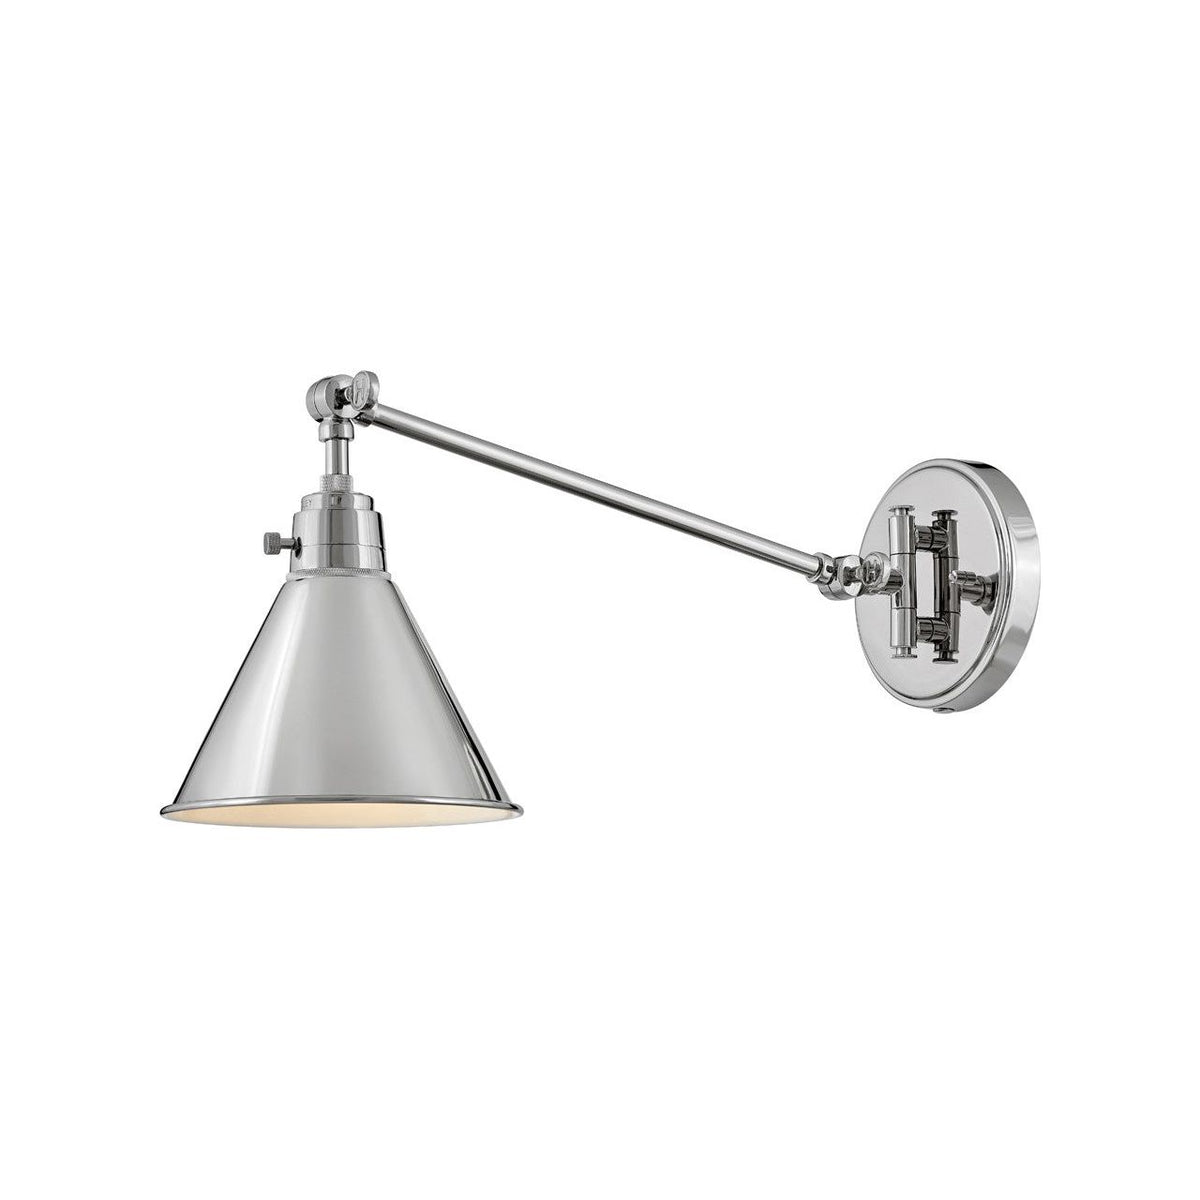 Hinkley Canada - 3690PN - LED Wall Sconce - Arti - Polished Nickel